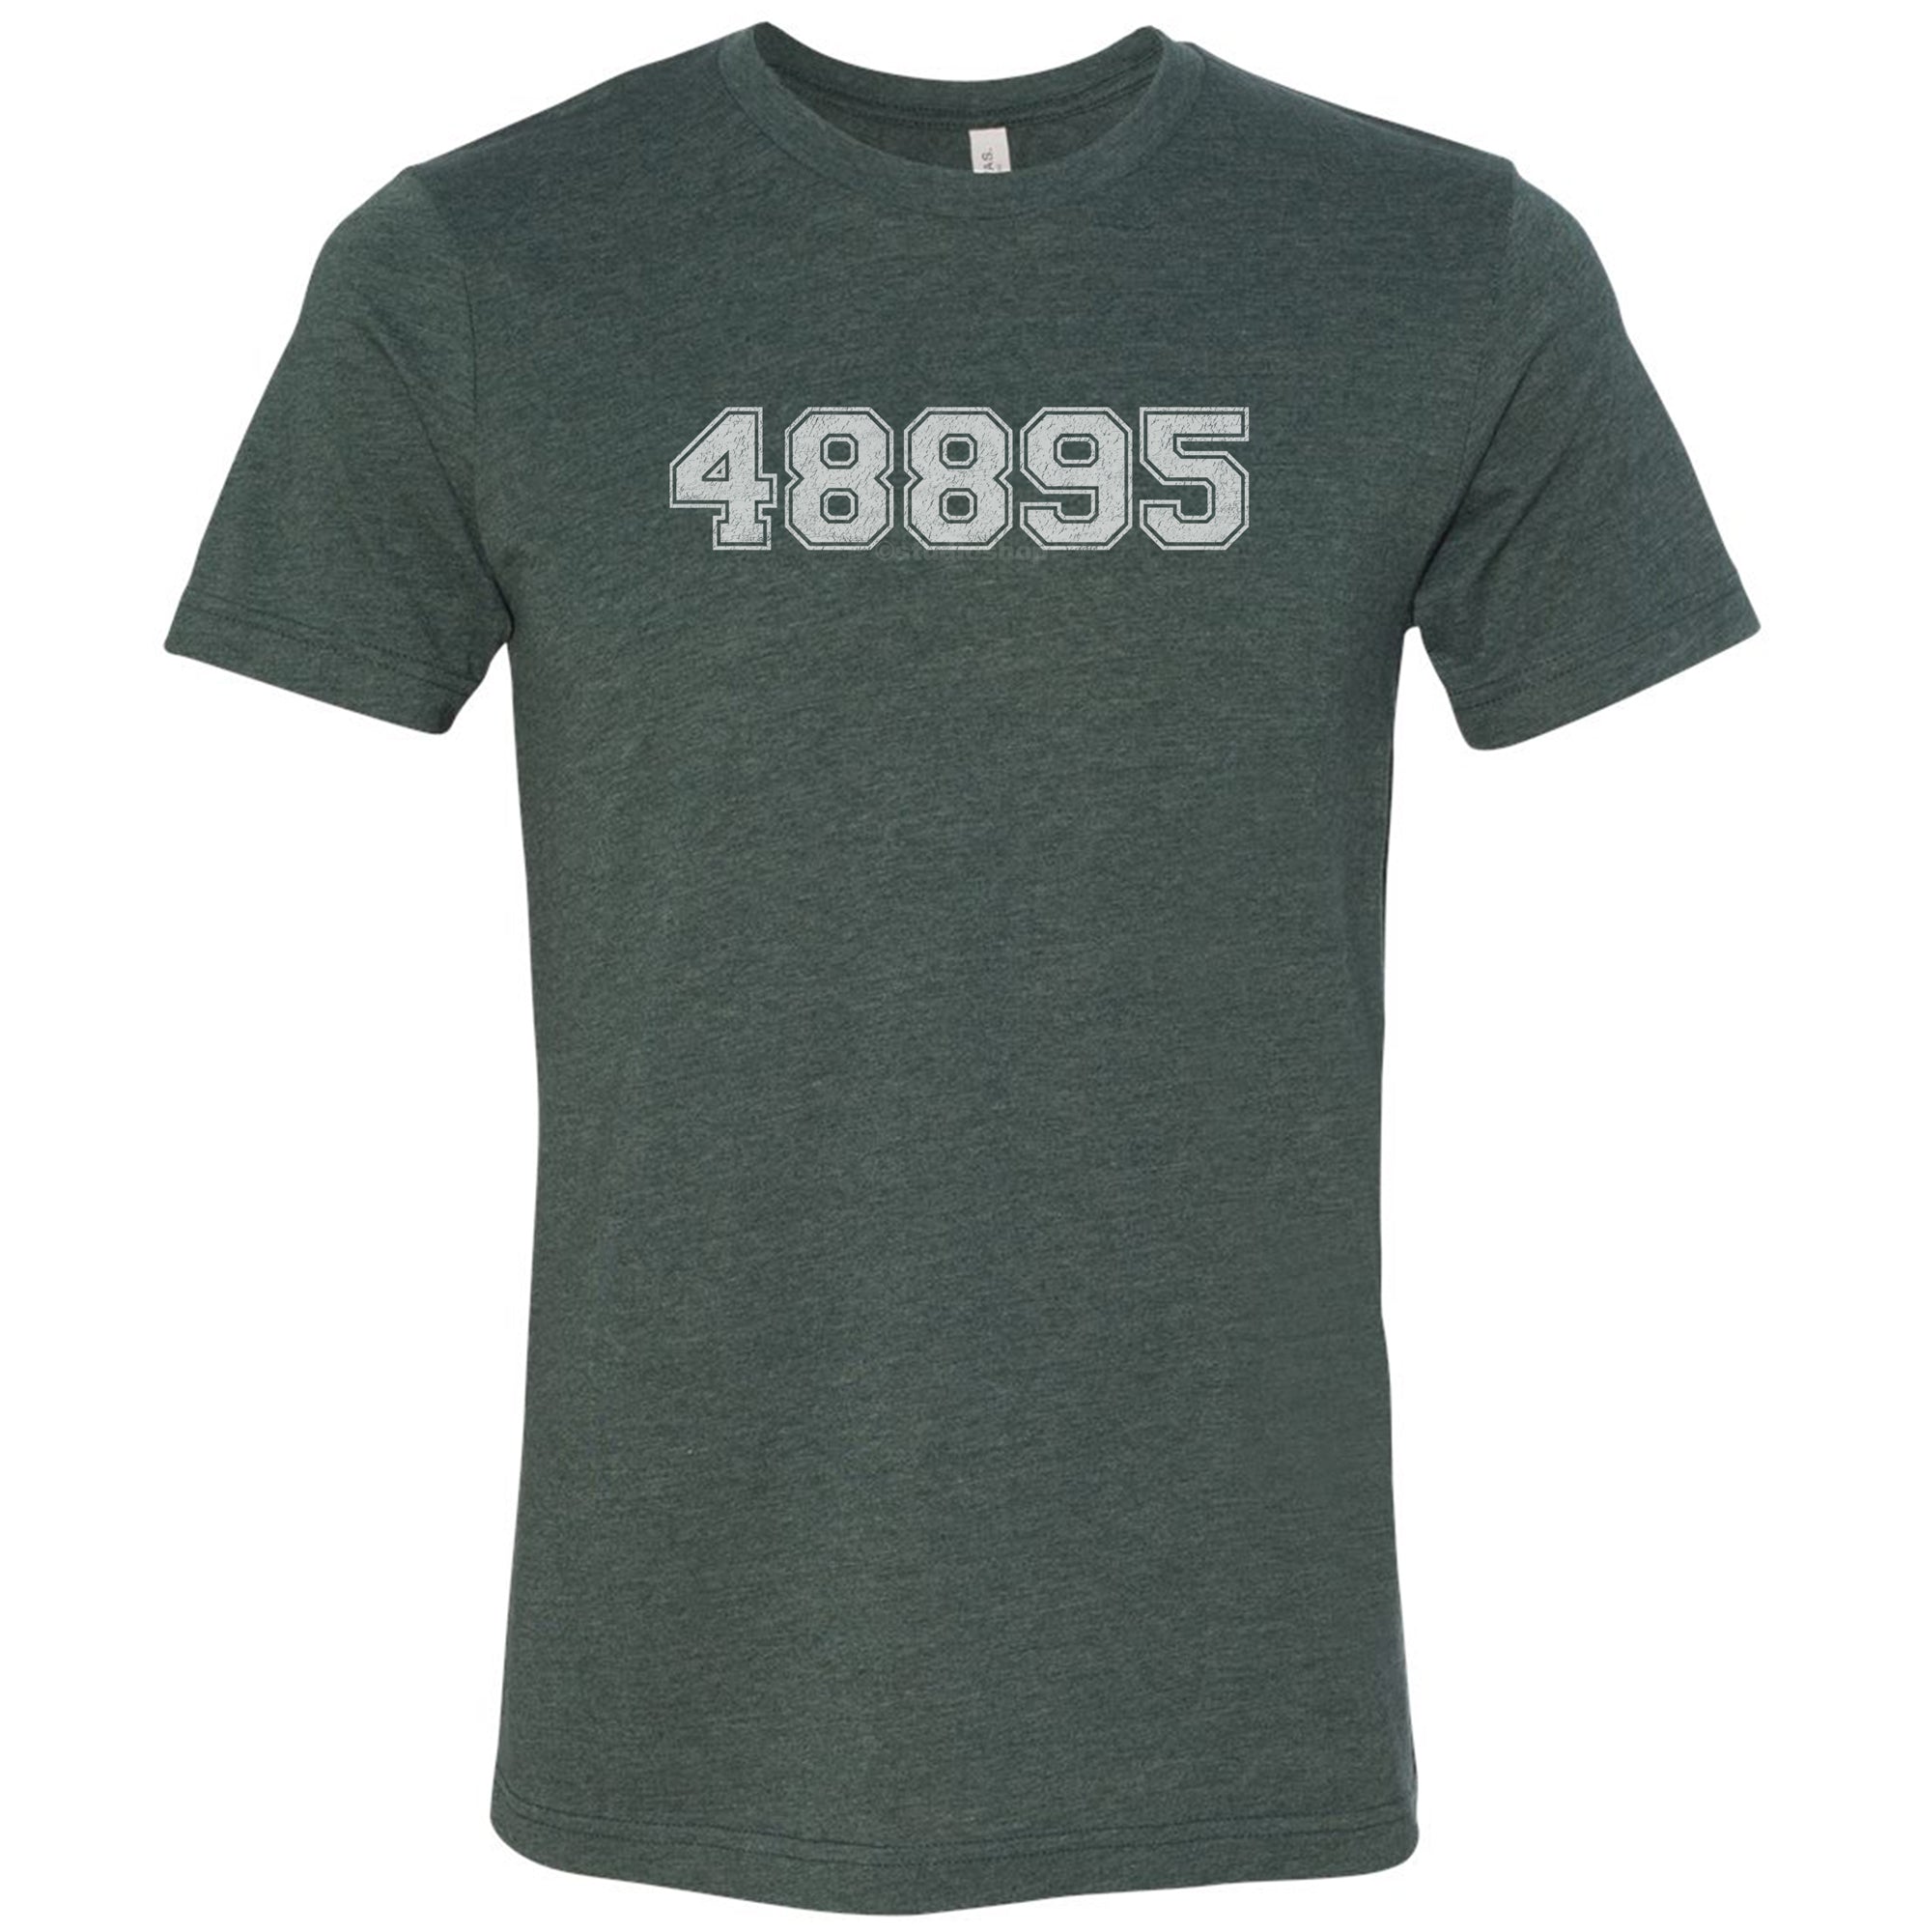 "48895" - Vintage - Blended Youth Tee